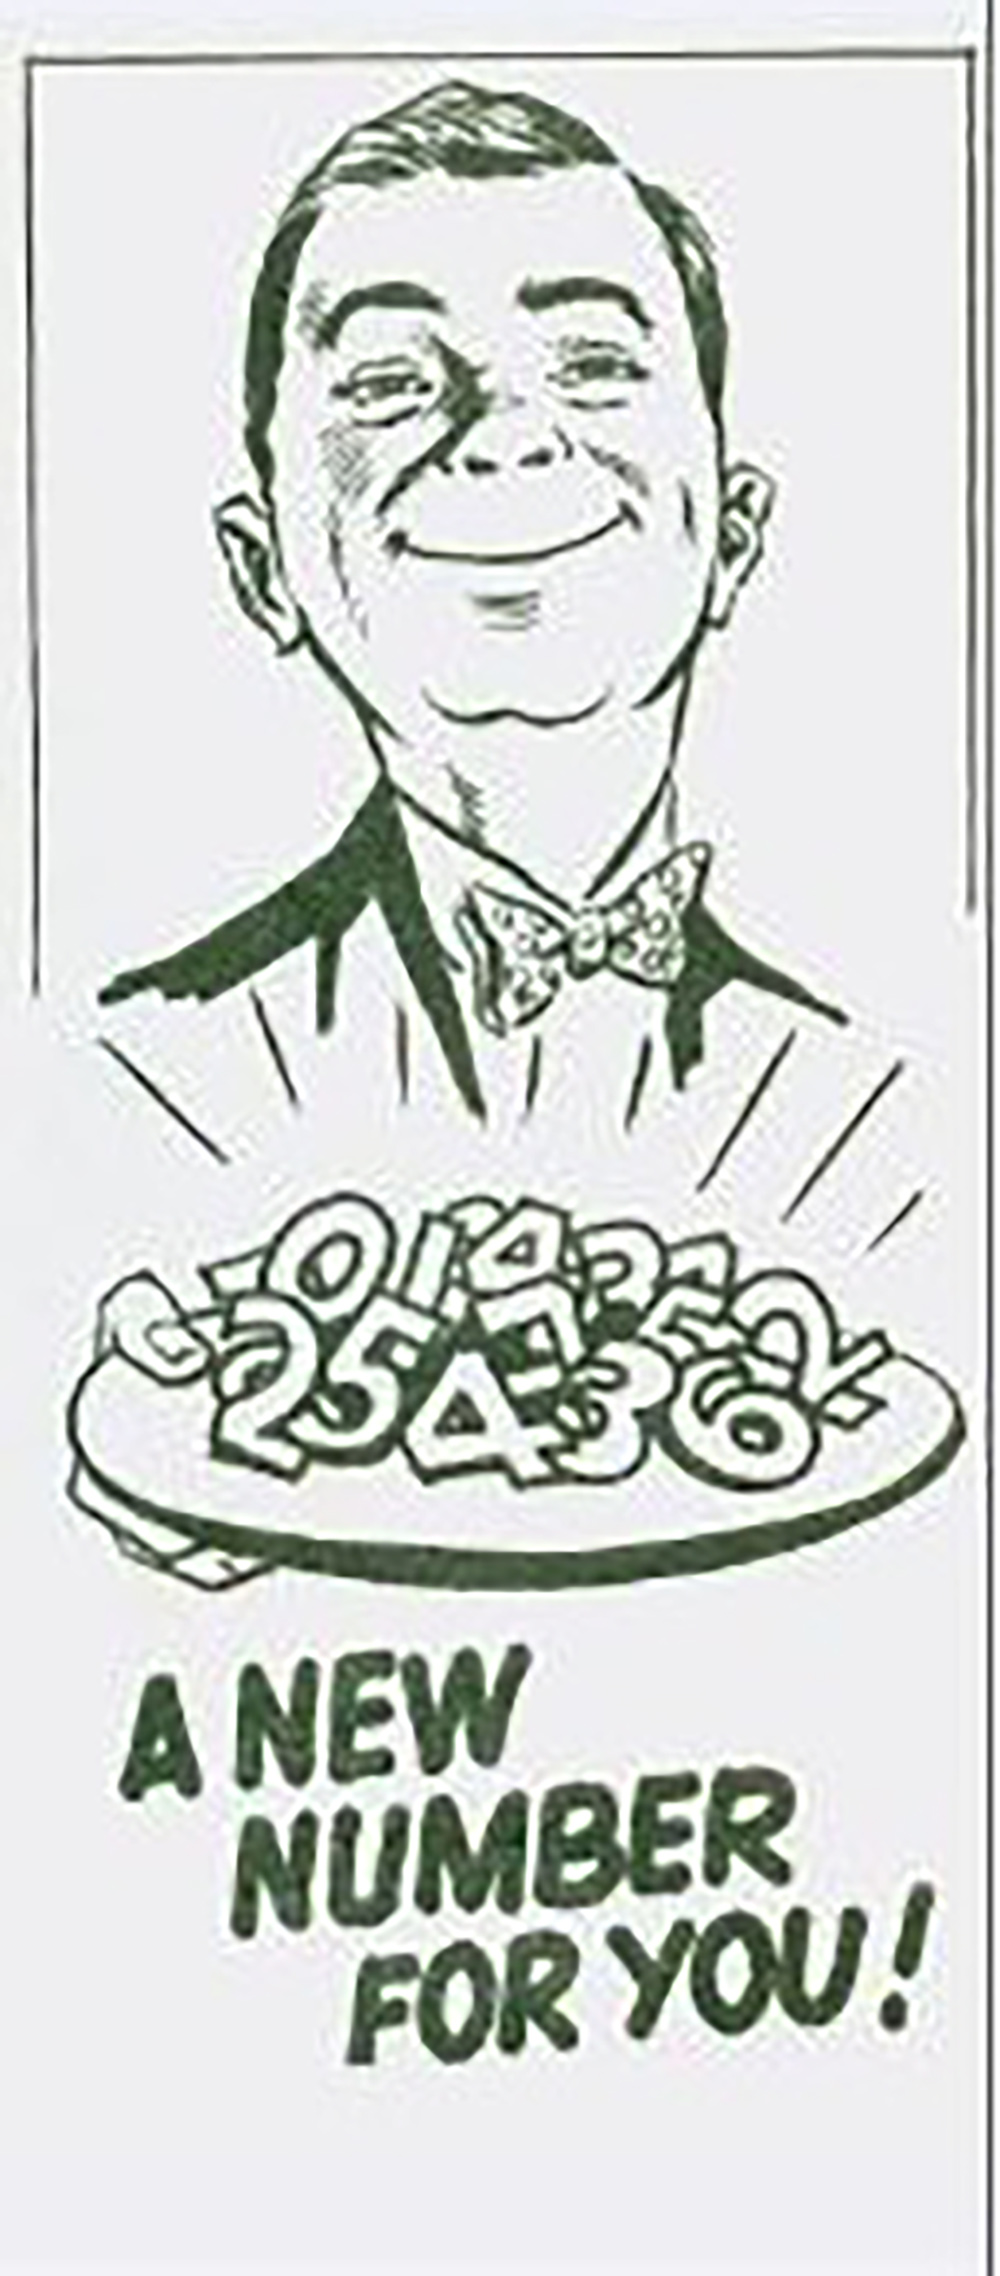 Digital scan of publicity file from 1960s City of Halifax program to change civic address – shows a butler holding a tray of numbers with text “A New Number for You!”